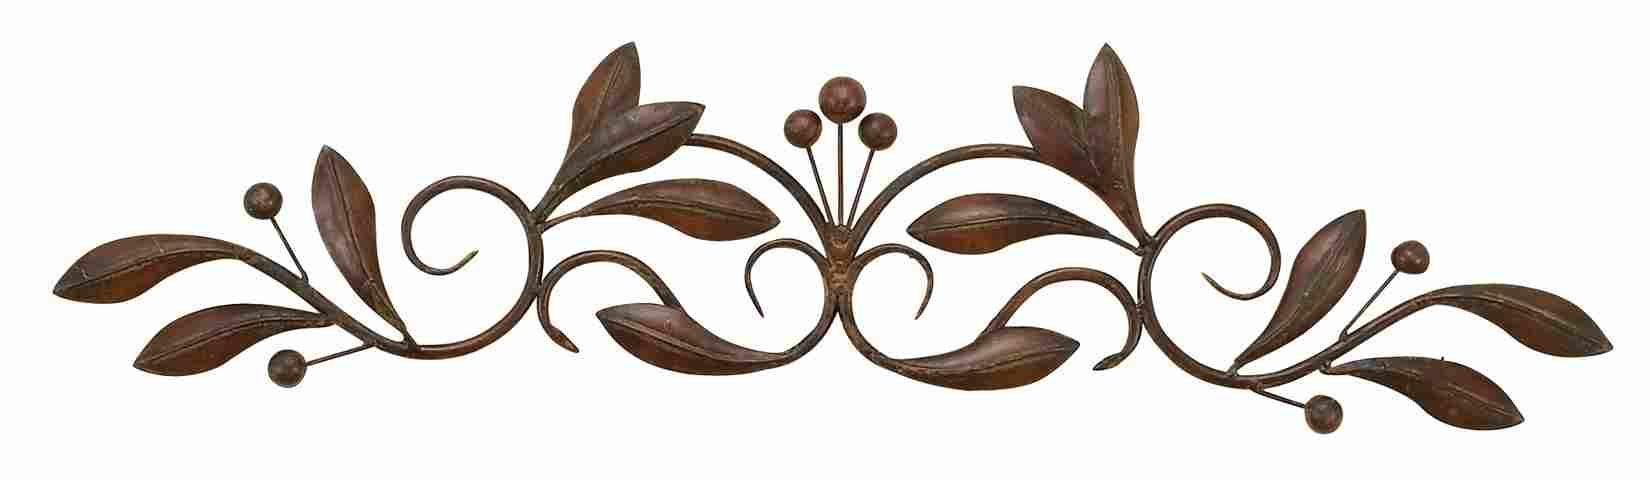 Rectangle Metal Scroll Wall Art | Brushed 3d Relief Metal Regarding Scroll Leaf Wall Decor (View 9 of 30)